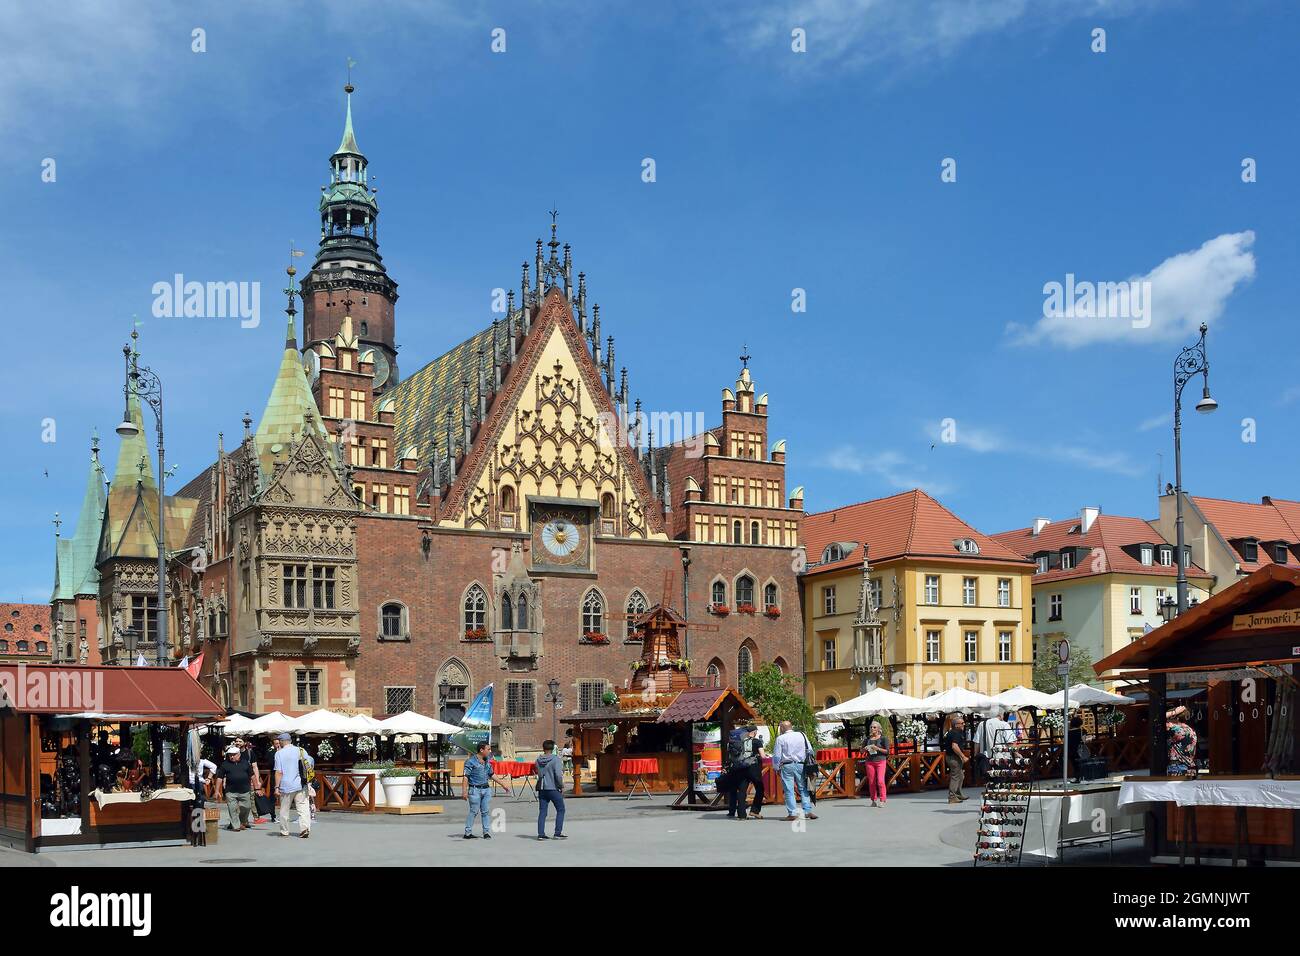 Old Town Hall on Market Square in the Old Town of Wroclaw - Poland. Stock Photo